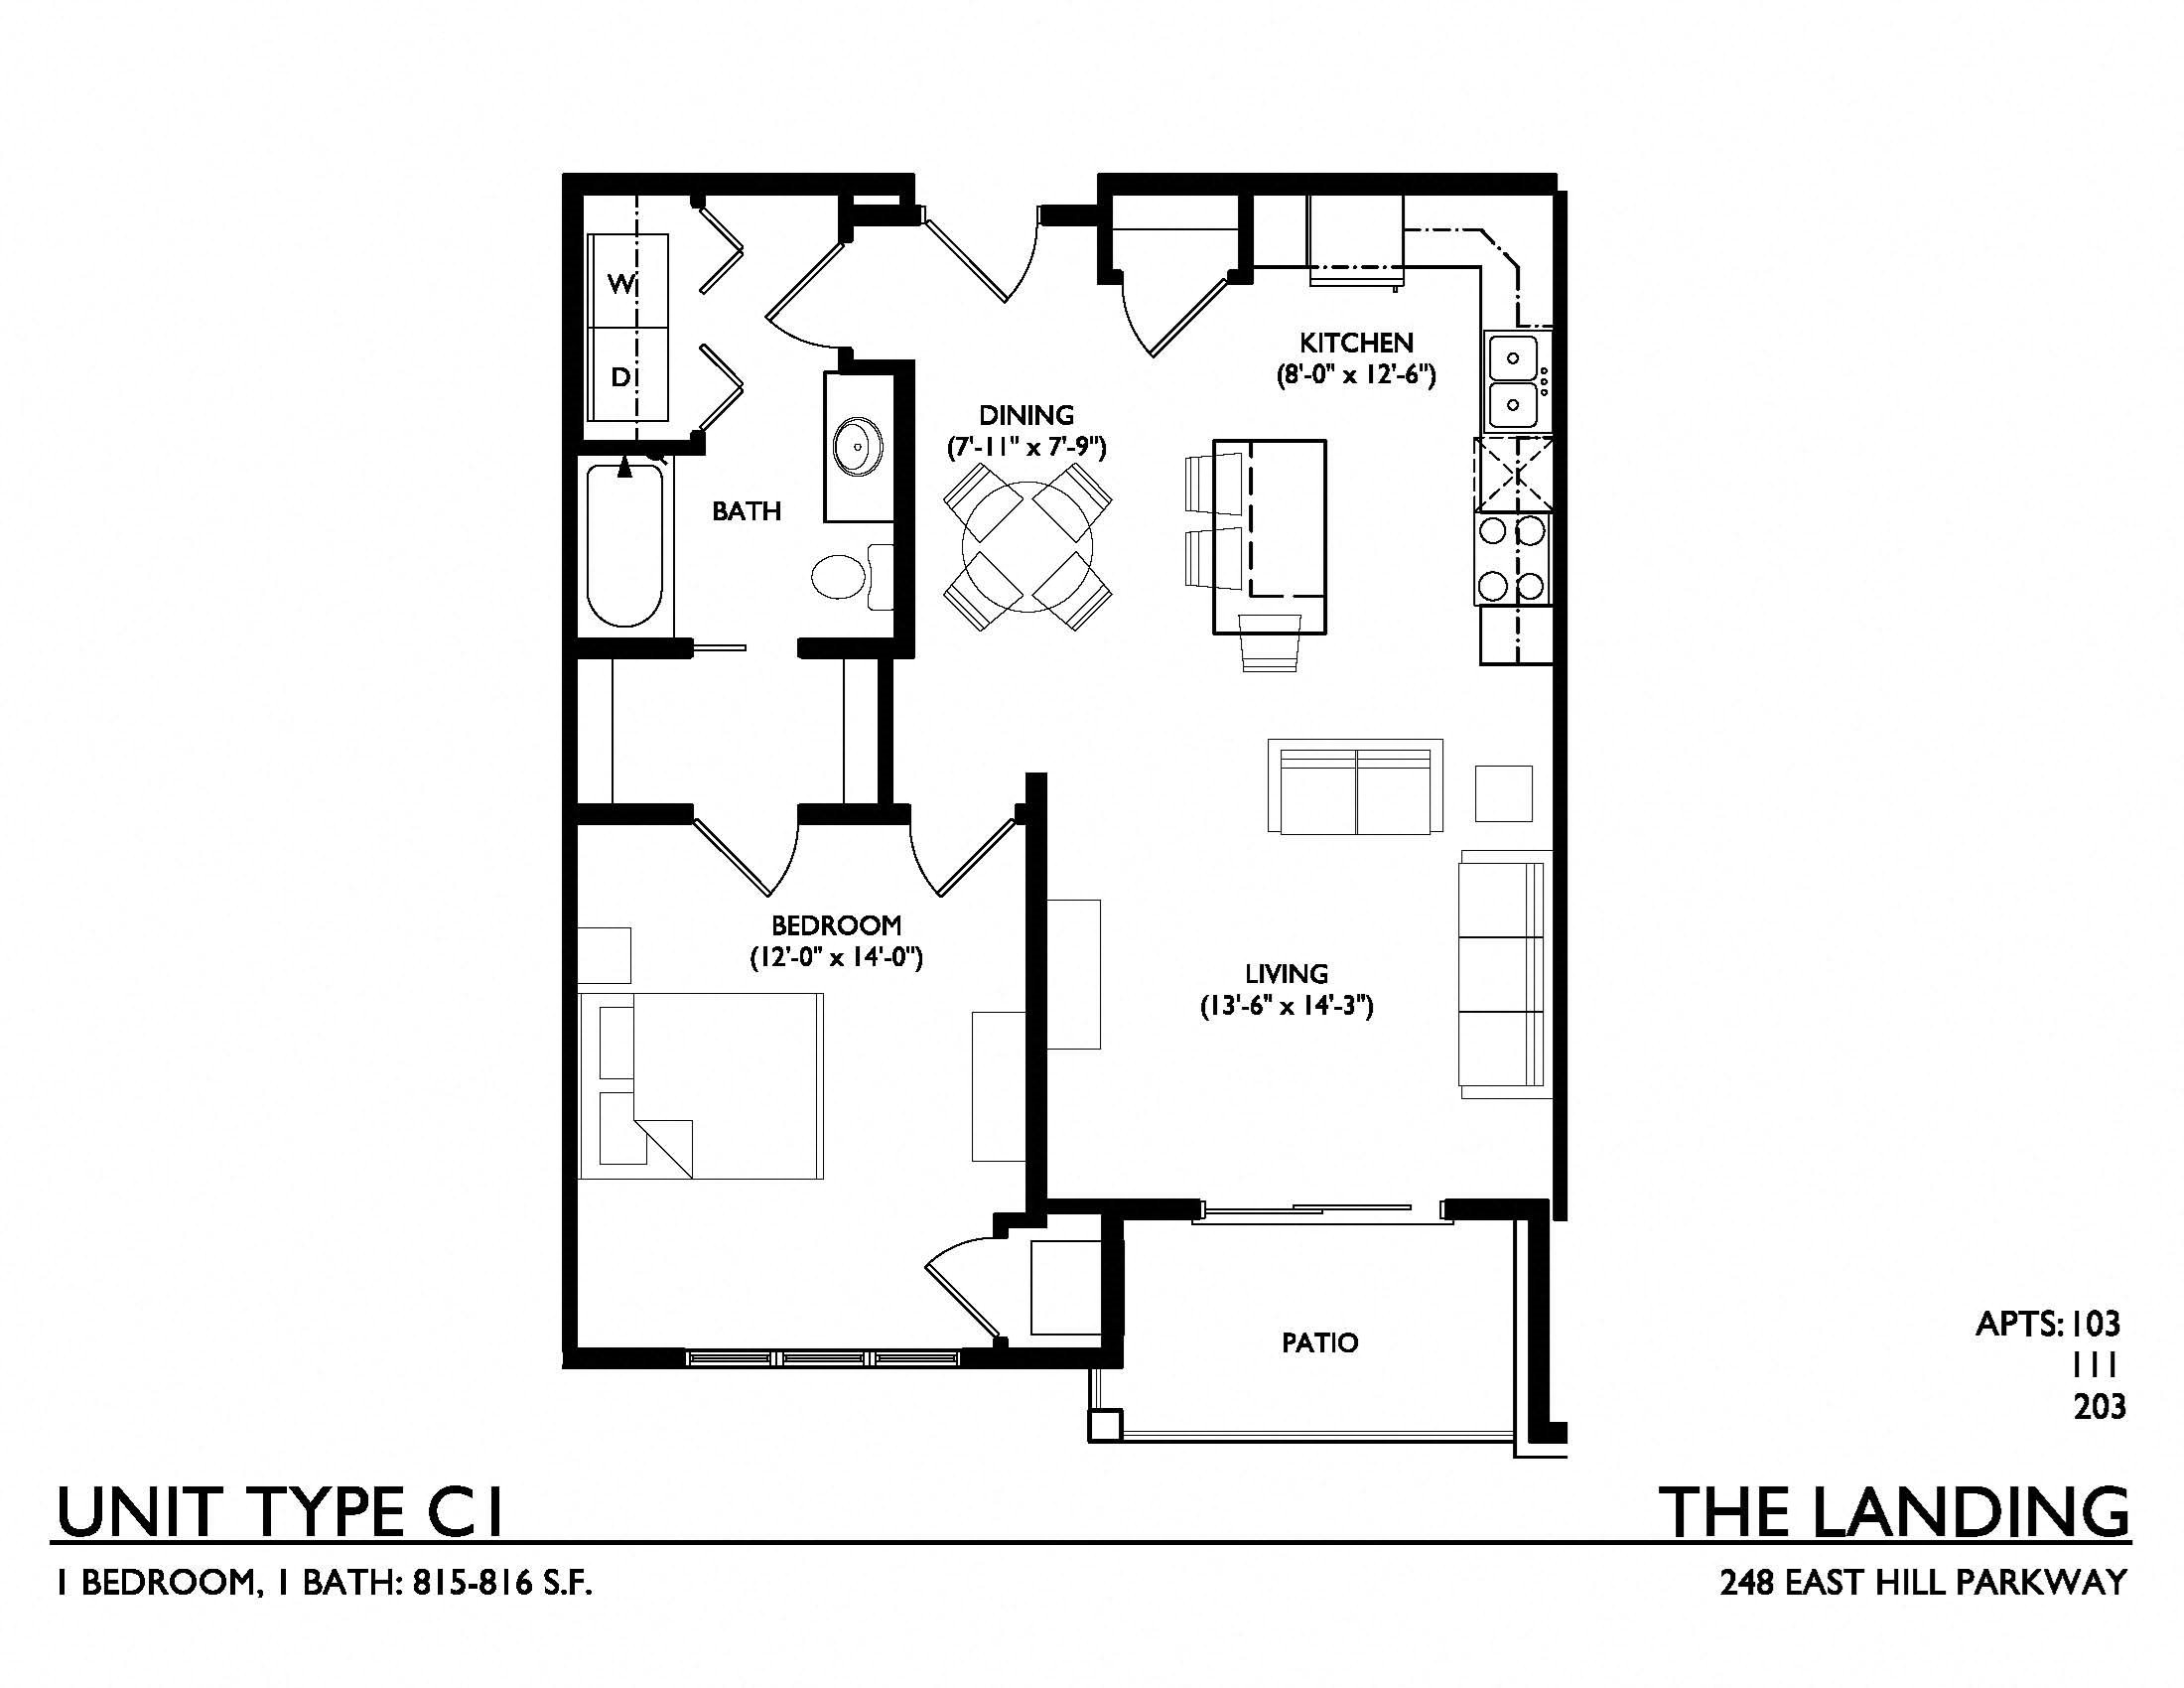 Floor Plans of The Landing on East Hill Parkway in Madison, WI